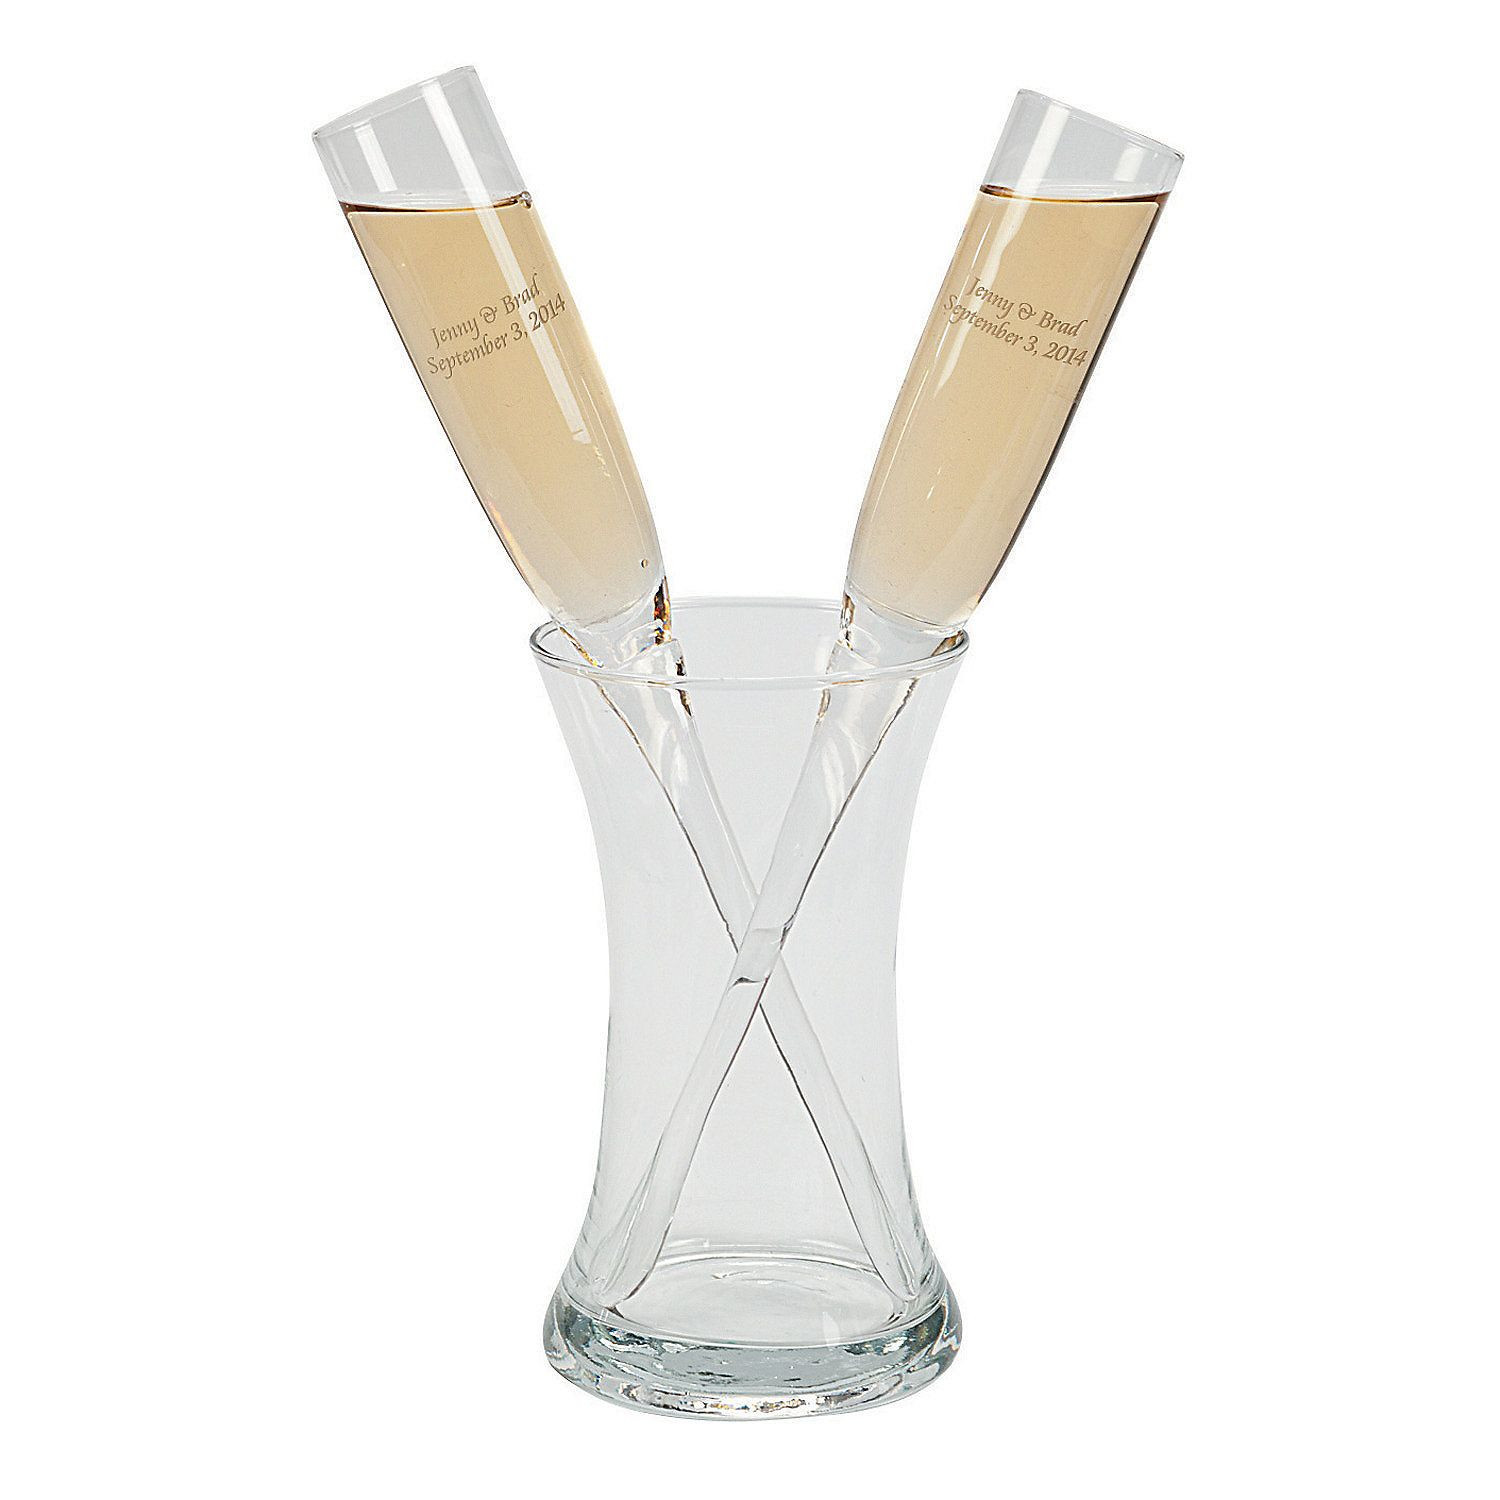 20 Popular Personalized Glass Vase 2024 free download personalized glass vase of personalized champagne flutes with vase champagne flutes flutes inside personalized champagne flutes with vase